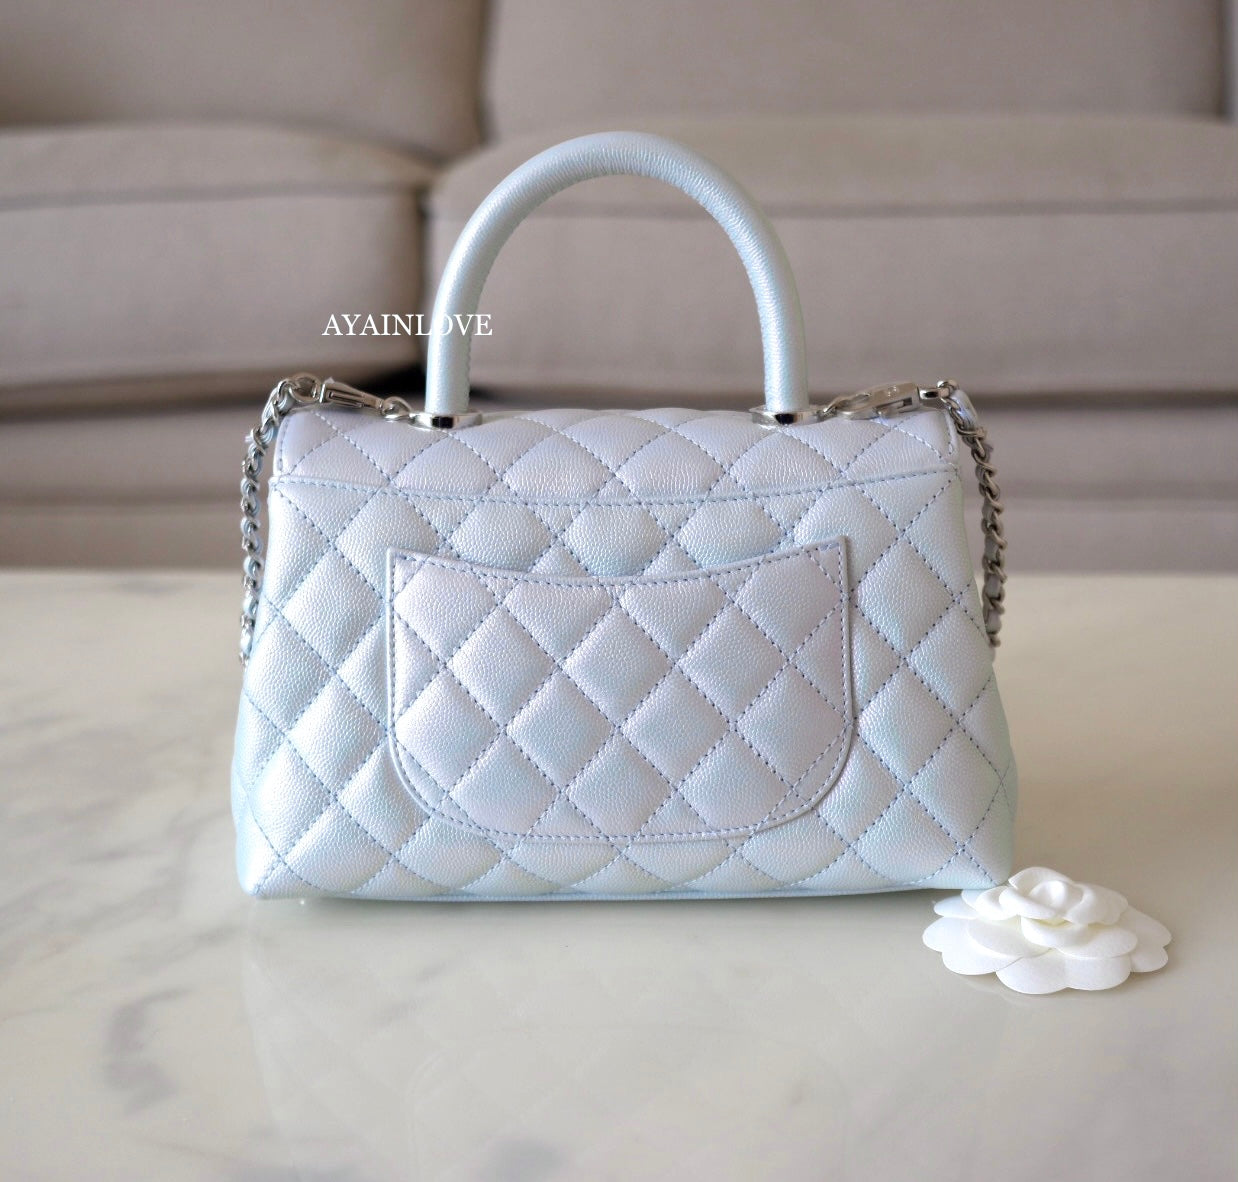 Chanel Blue Caviar Leather Coco Top Handle Small Bag Chanel